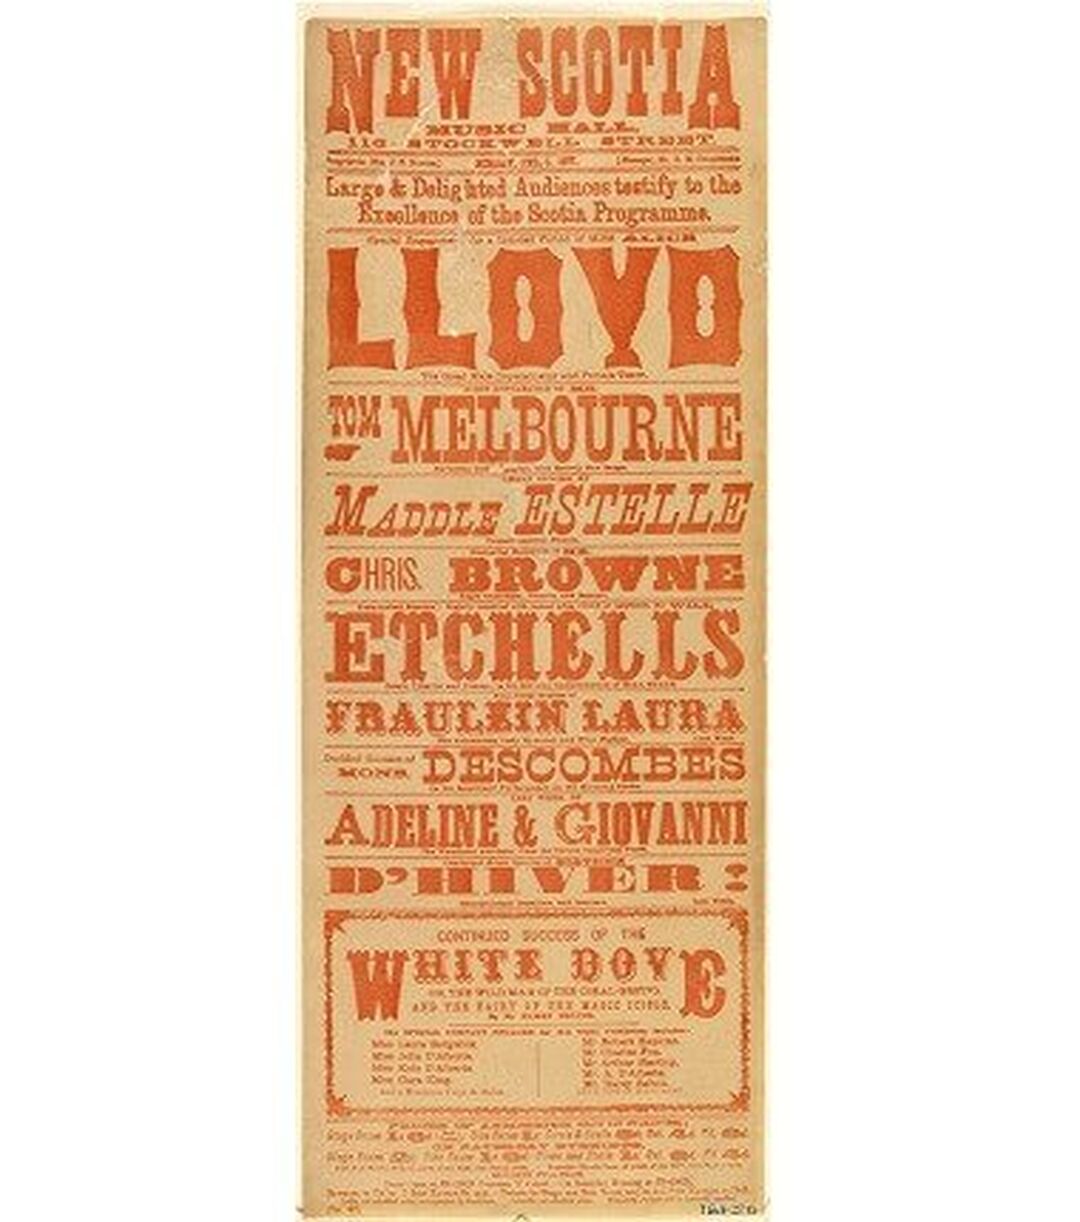 A theatre Poster for the New Scotia Music Hall from 1877